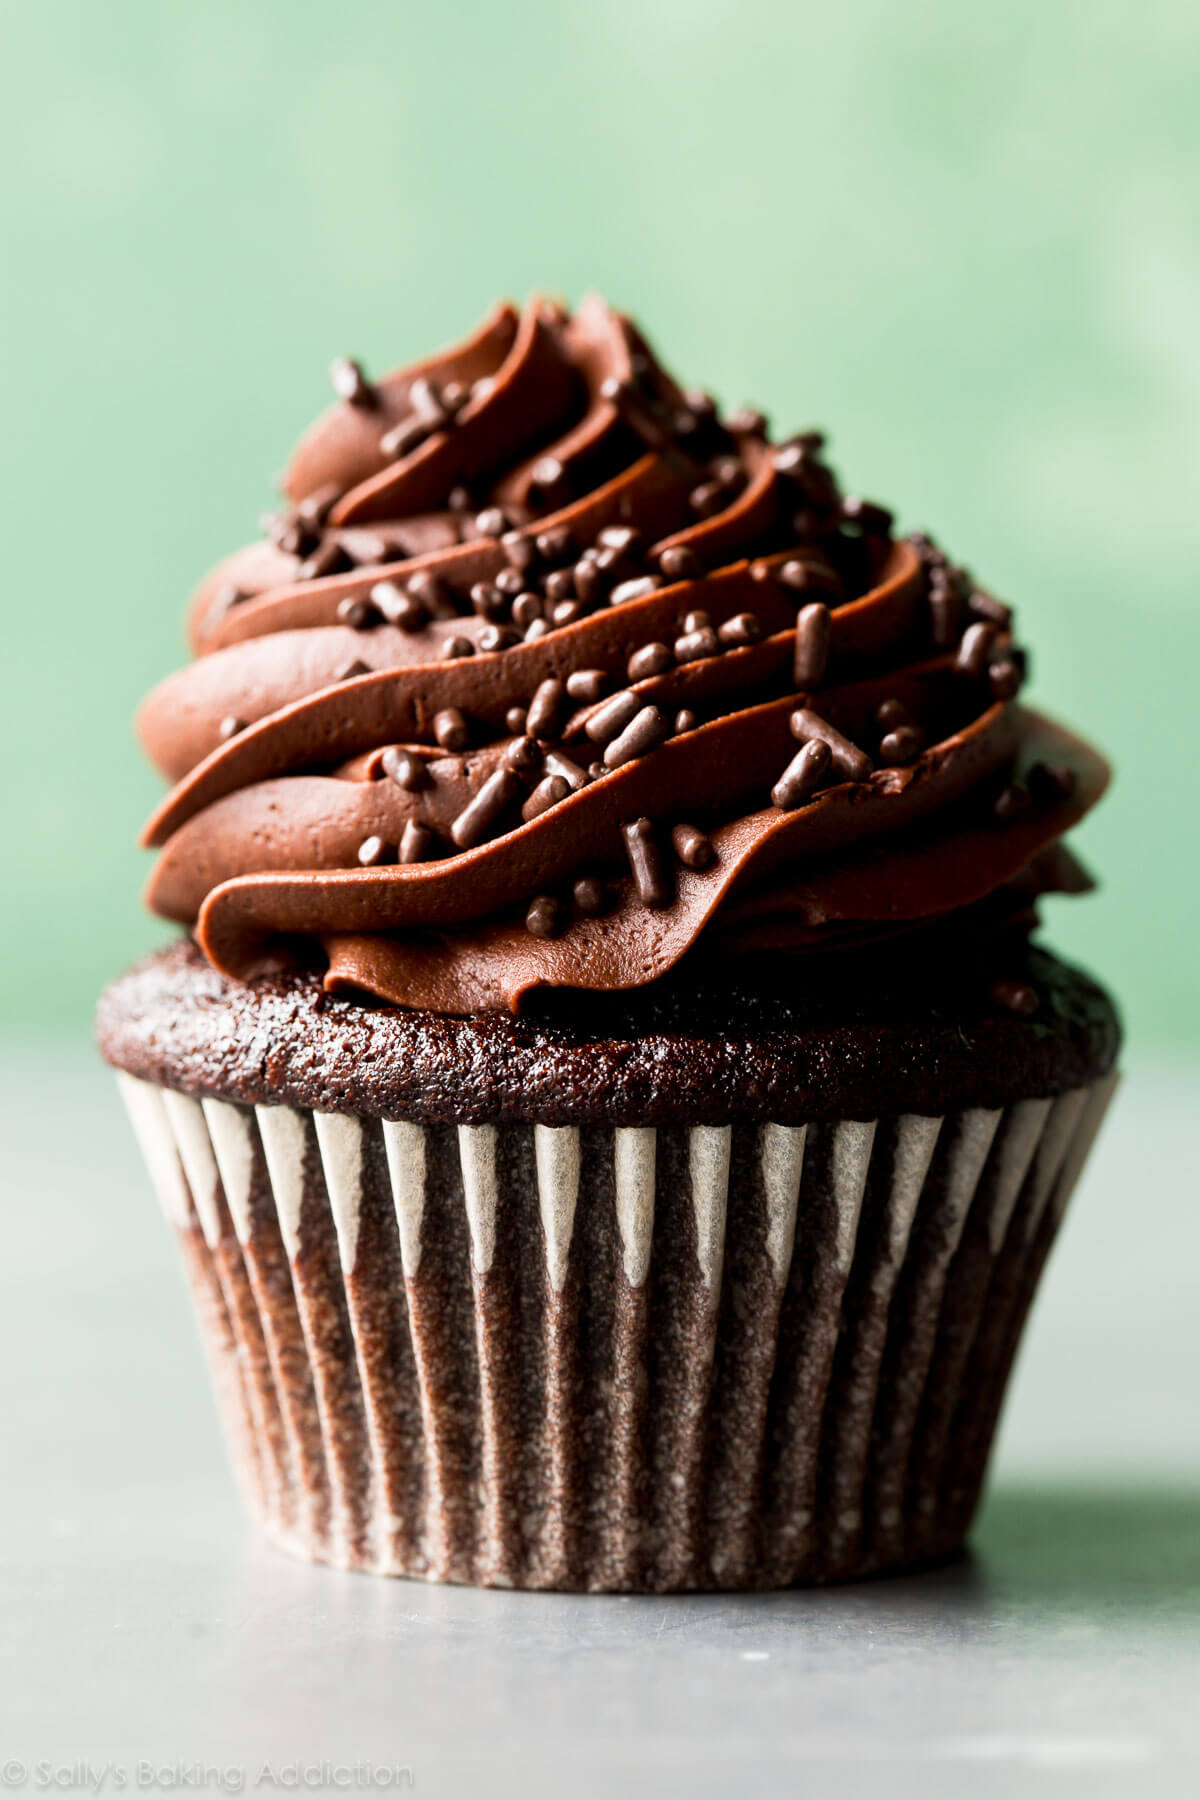 Classic Chocolate Cupcakes with Vanilla Frosting. - Sallys Baking ...